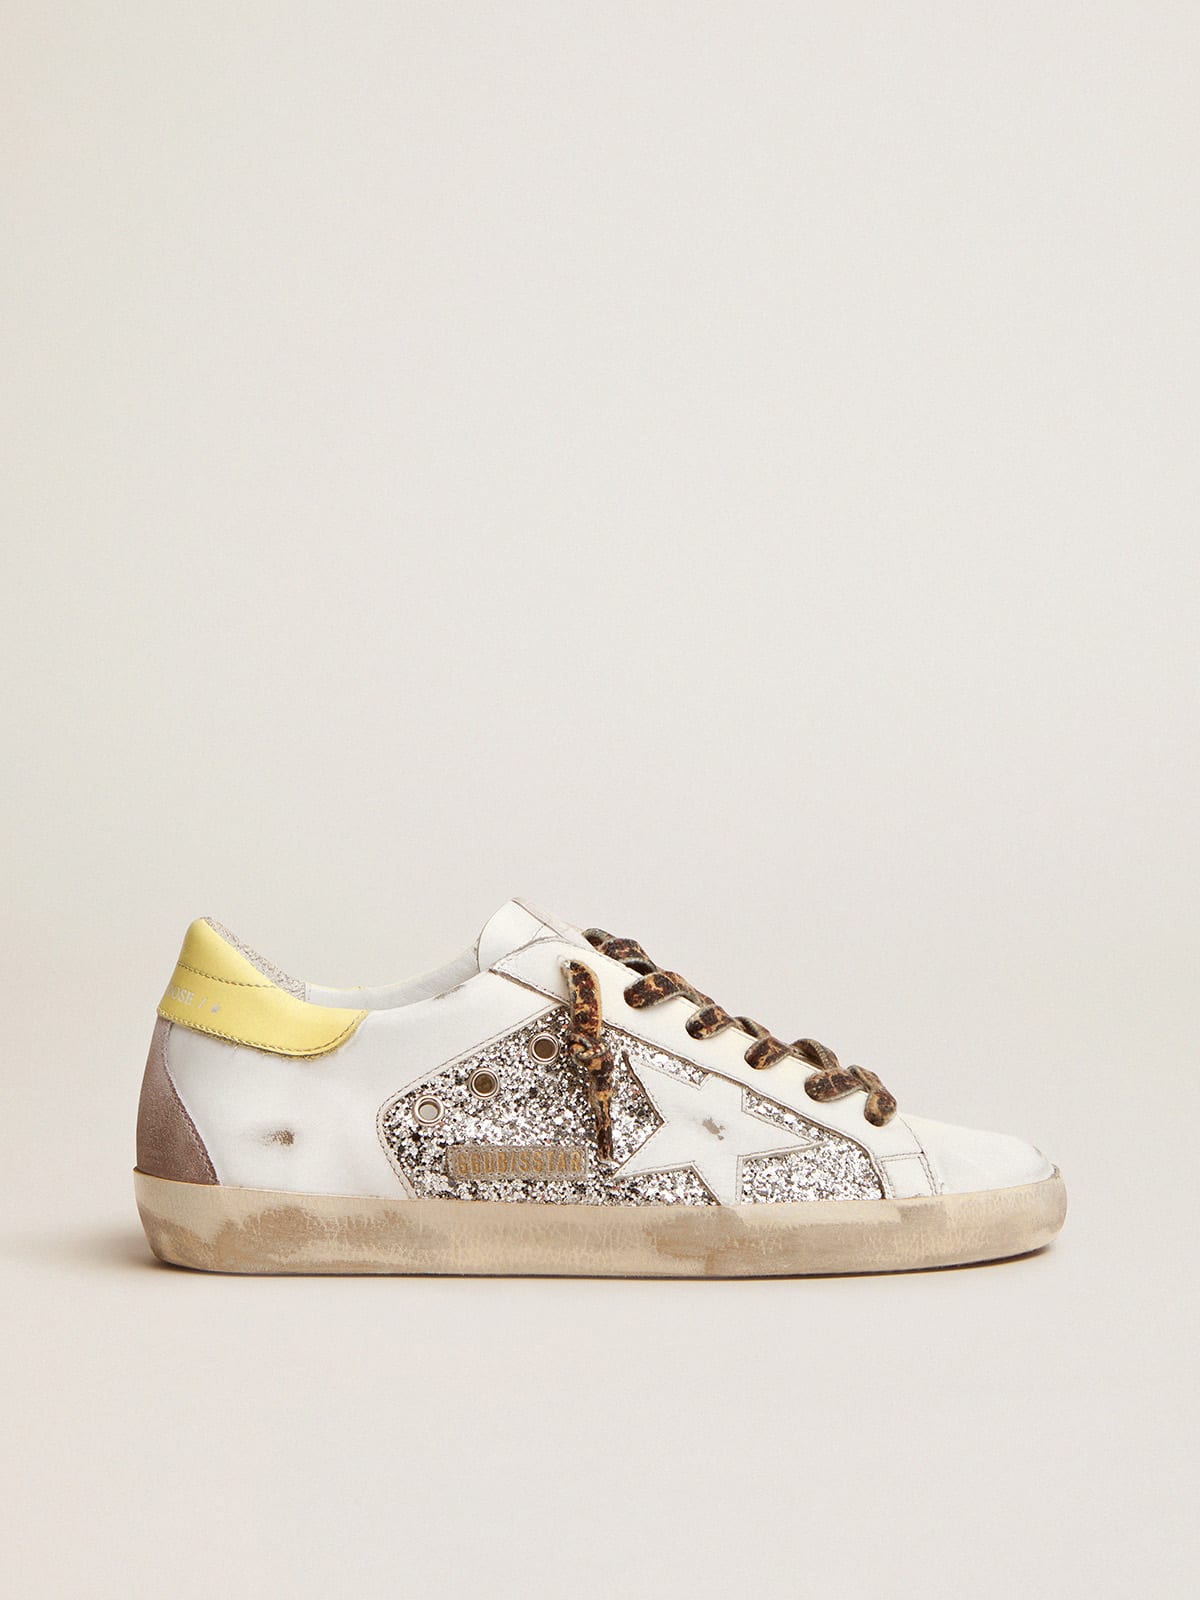 LTD Super-Star Sneakers in leather and glitter with colorful heel tab ...